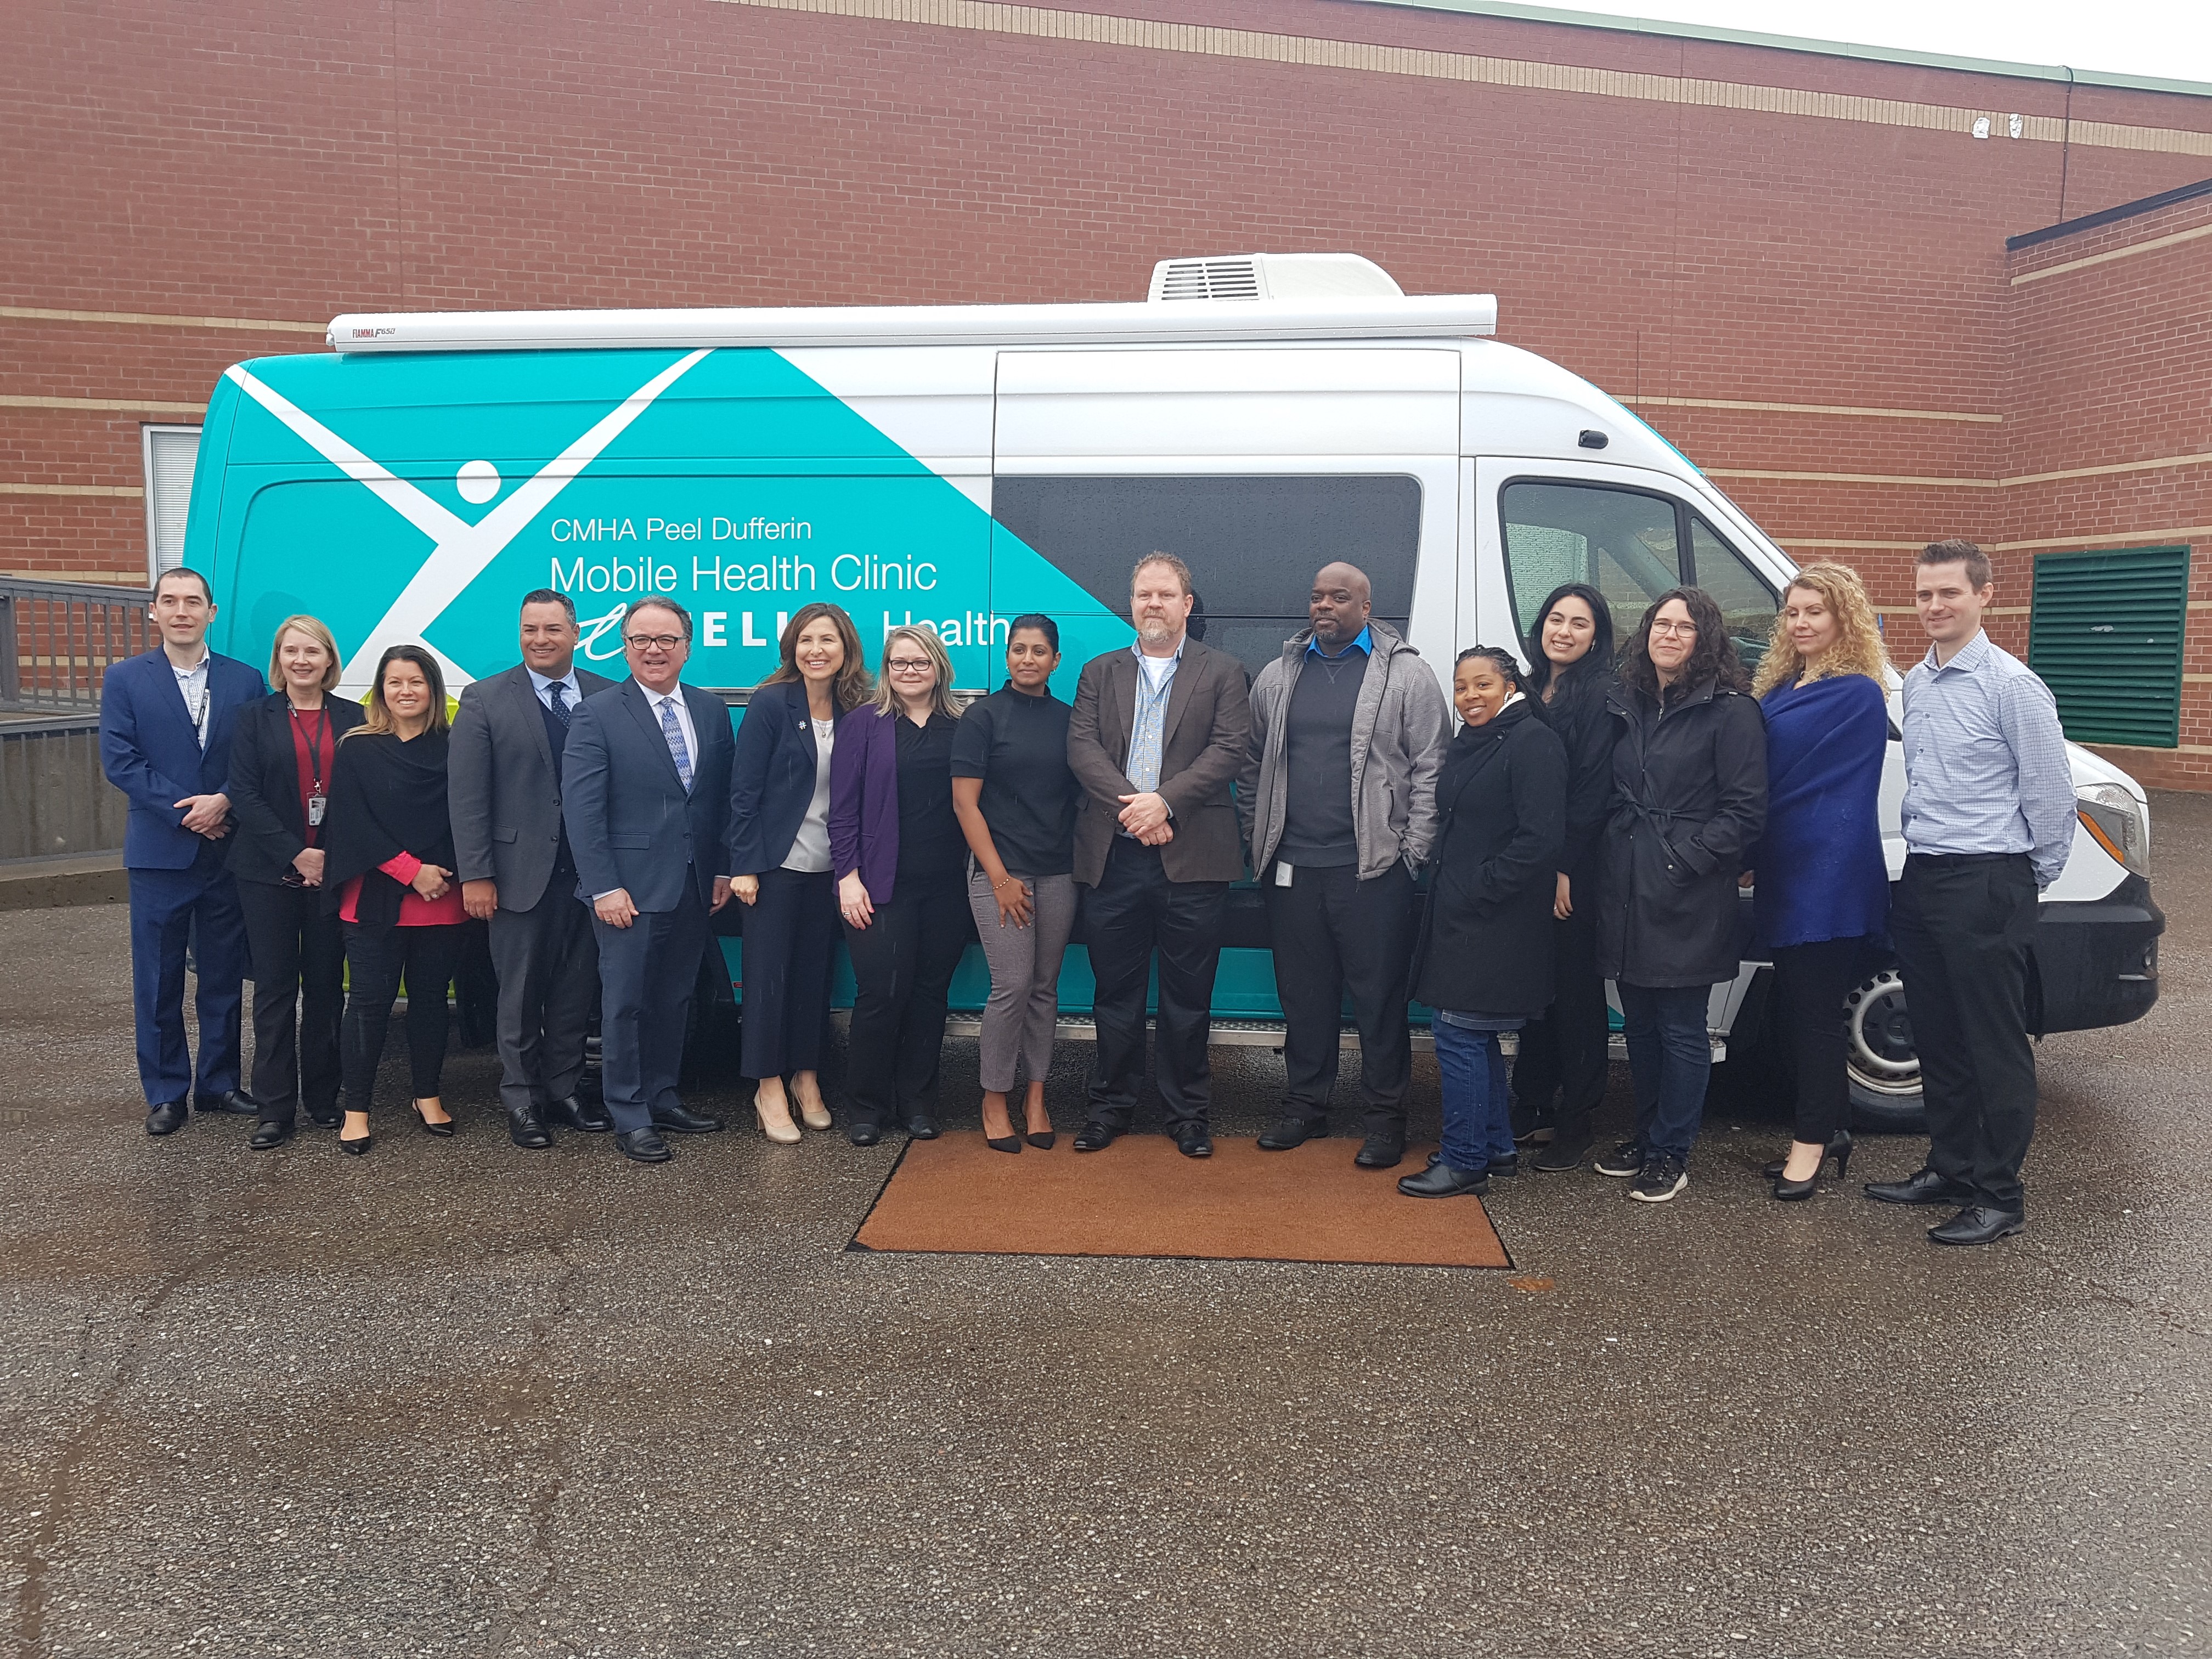 CMHA Team standing infront of the Mobile Health Clinic powered by TELUS